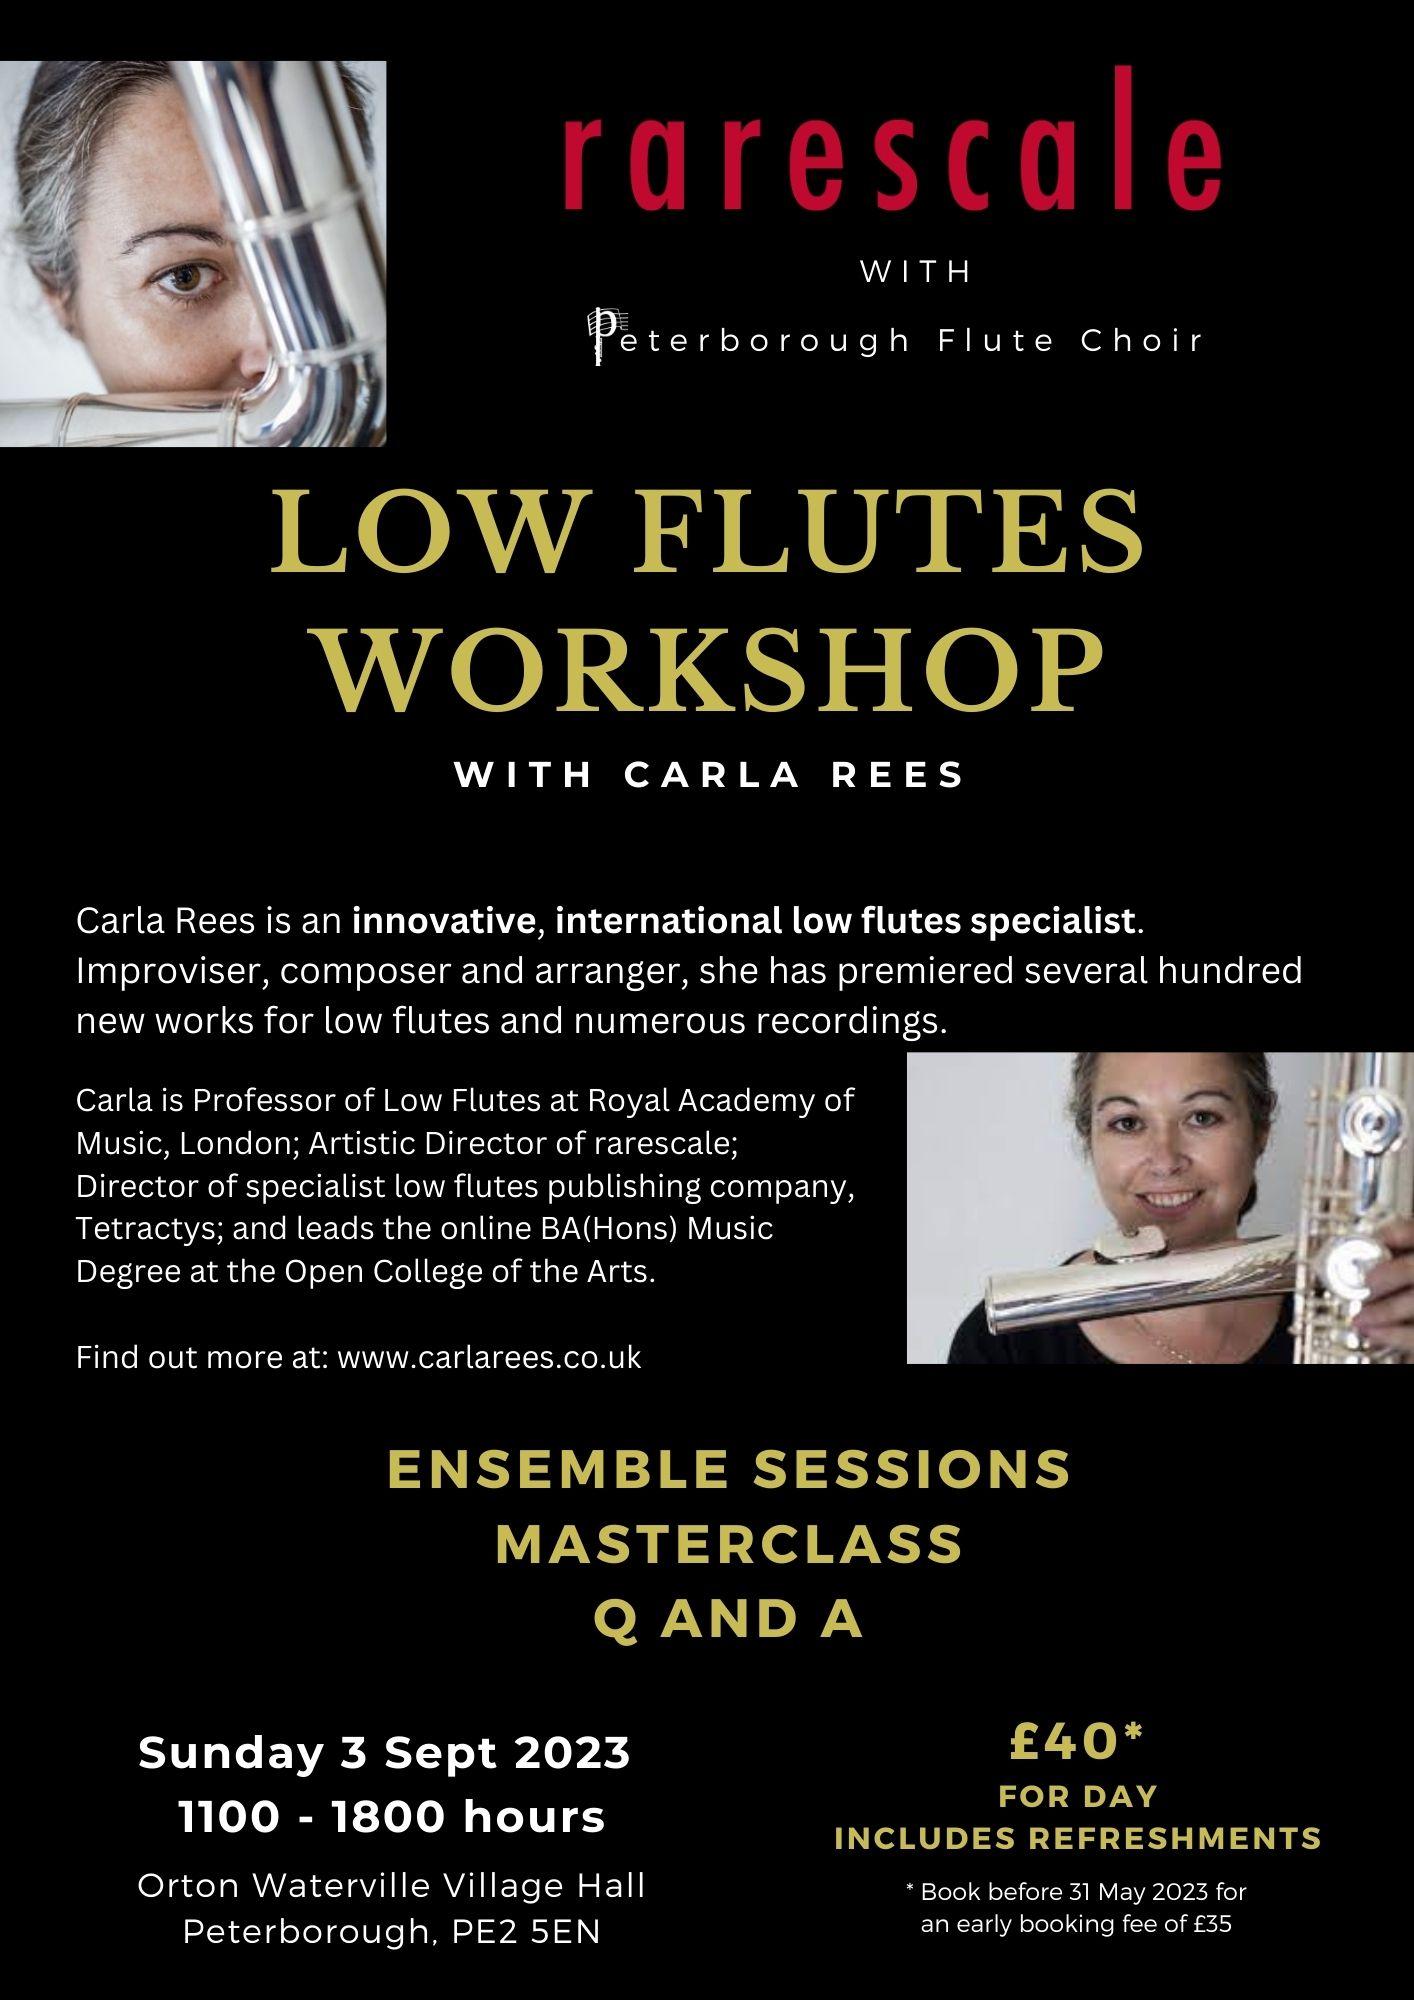 Low flutes workshop with Carla Rees